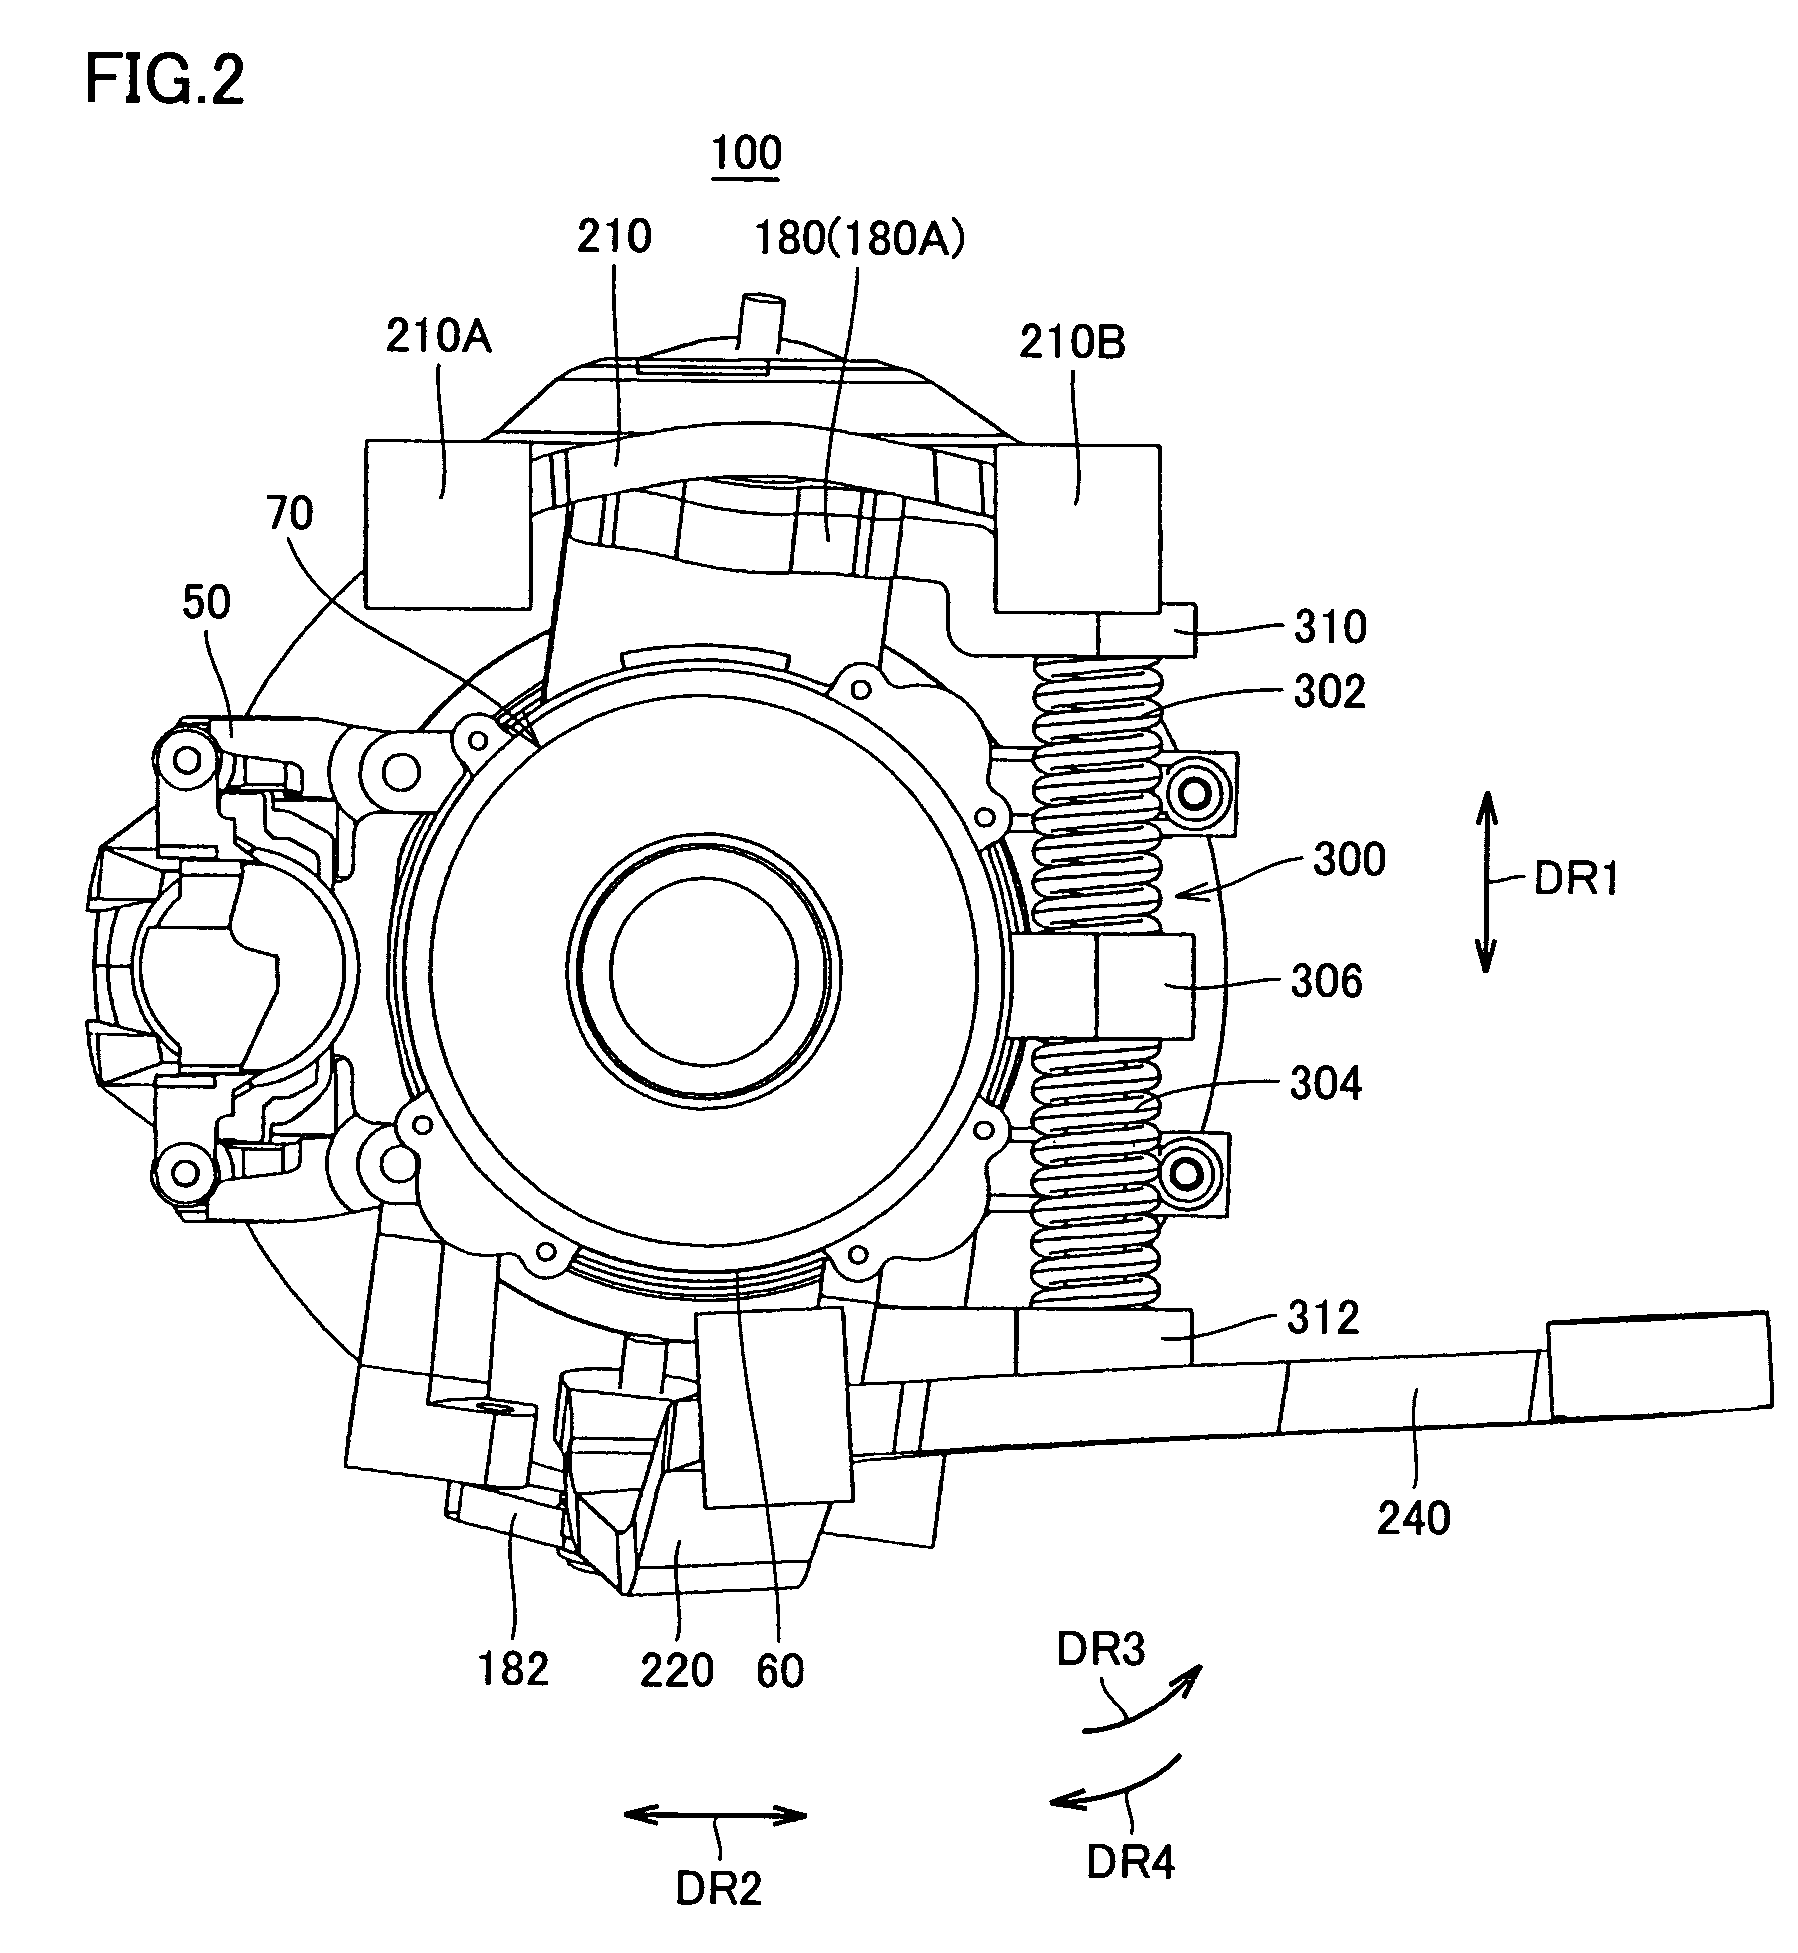 In-wheel motor with high durability